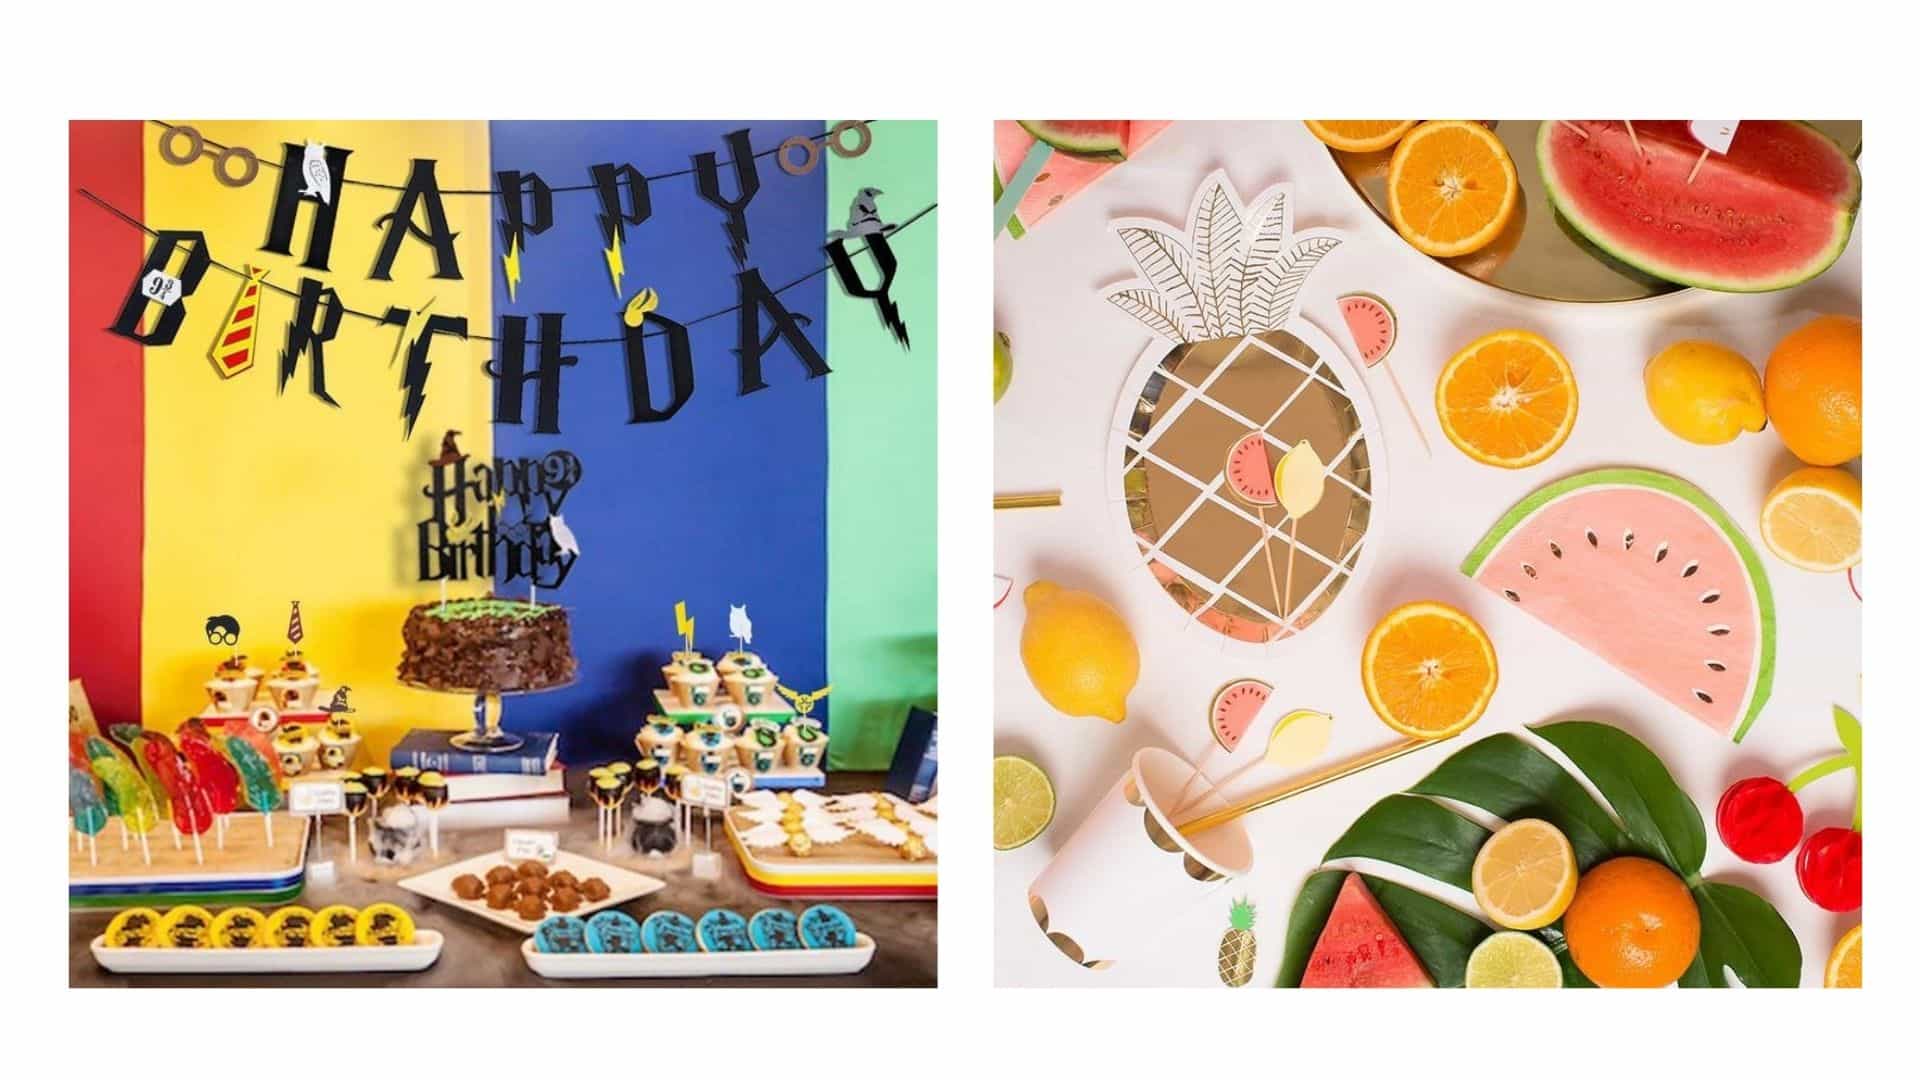 A split image, the one on the left showing a birthday cake, bunting, and treats in a Harry Potter theme, and the one on the right showing tropical island themed party decorations.